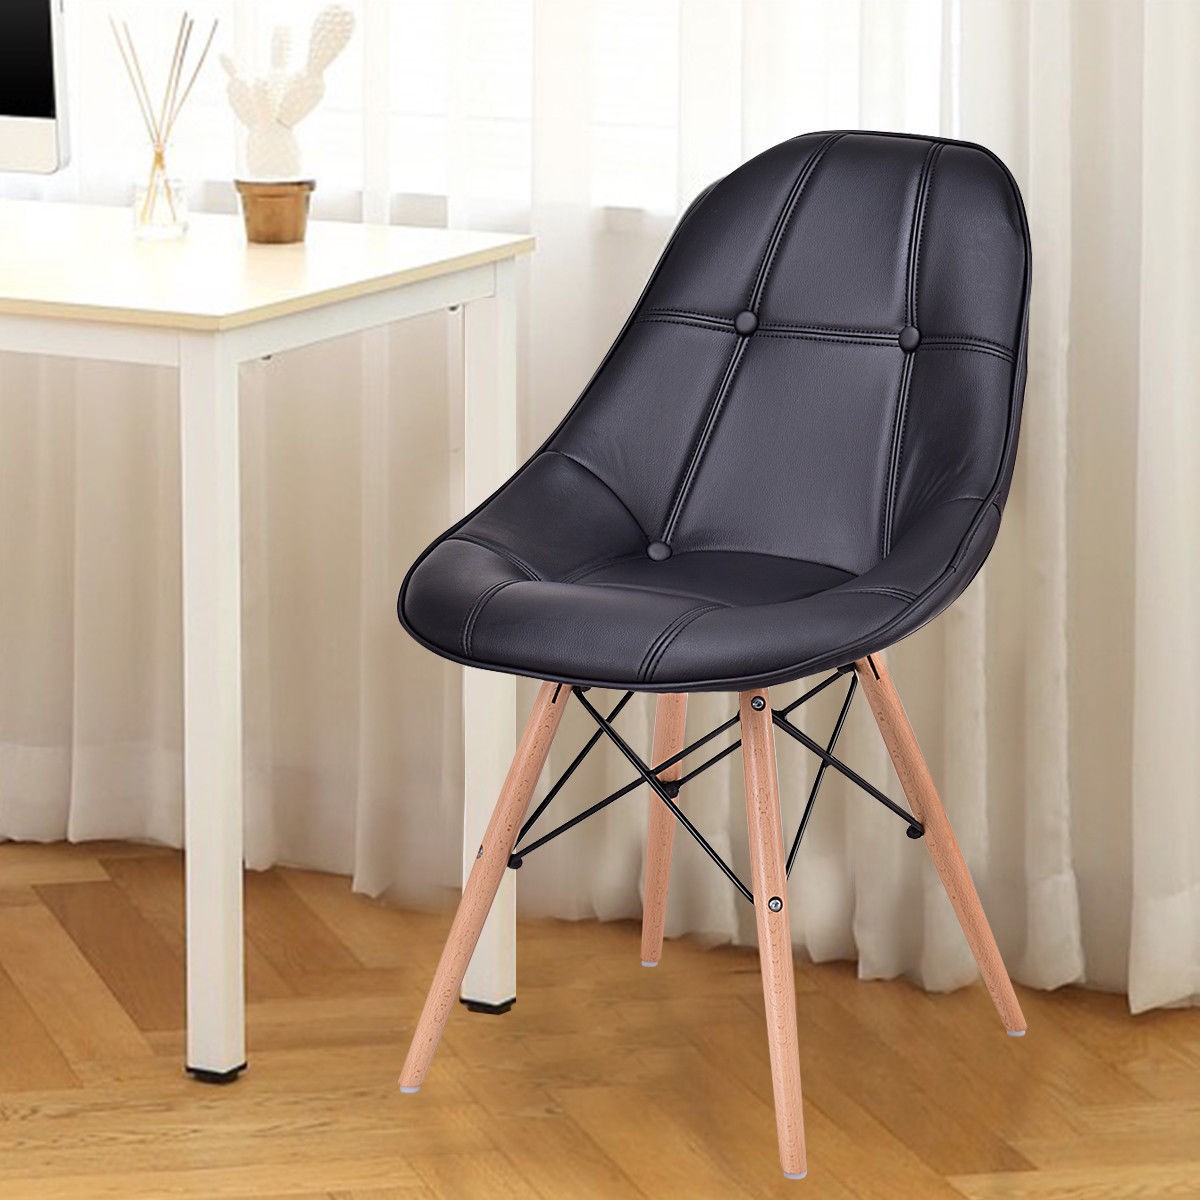 Set Of 2 Armless PU Leather Dining Chairs With Wooden Legs